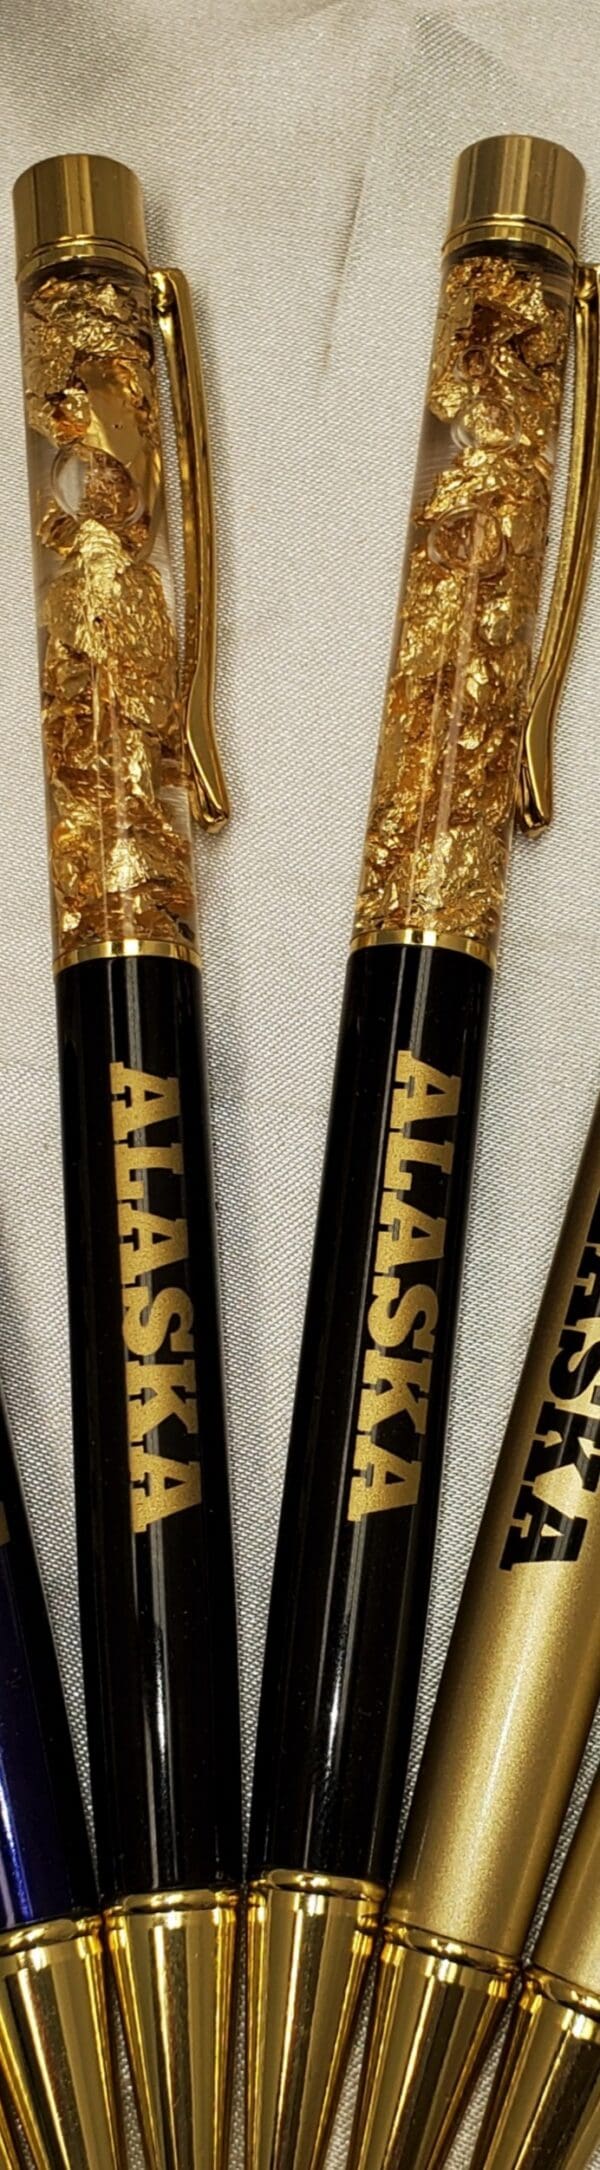 Two pens with gold leaf on top of them.